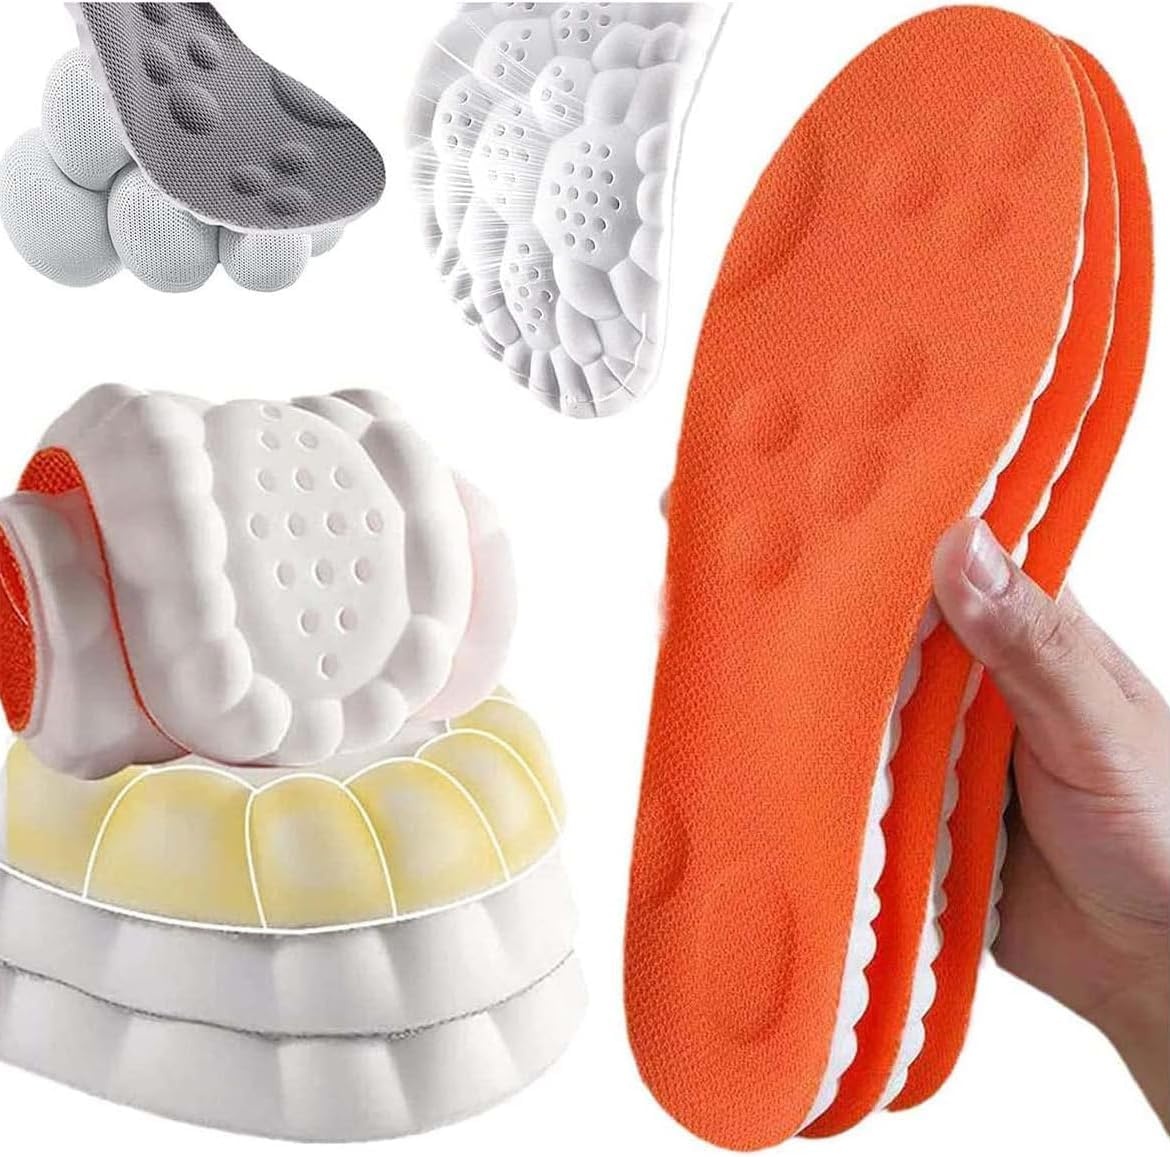 4D Insoles-4D Cloud Technology Insole,Metatarsal Orthotic Insoles Arch Supports Inserts, High-Elastic Shock-Absorbing Insoles,Plantar Fasciitis, Ball of Foot Pain Relief (39-40, orange)